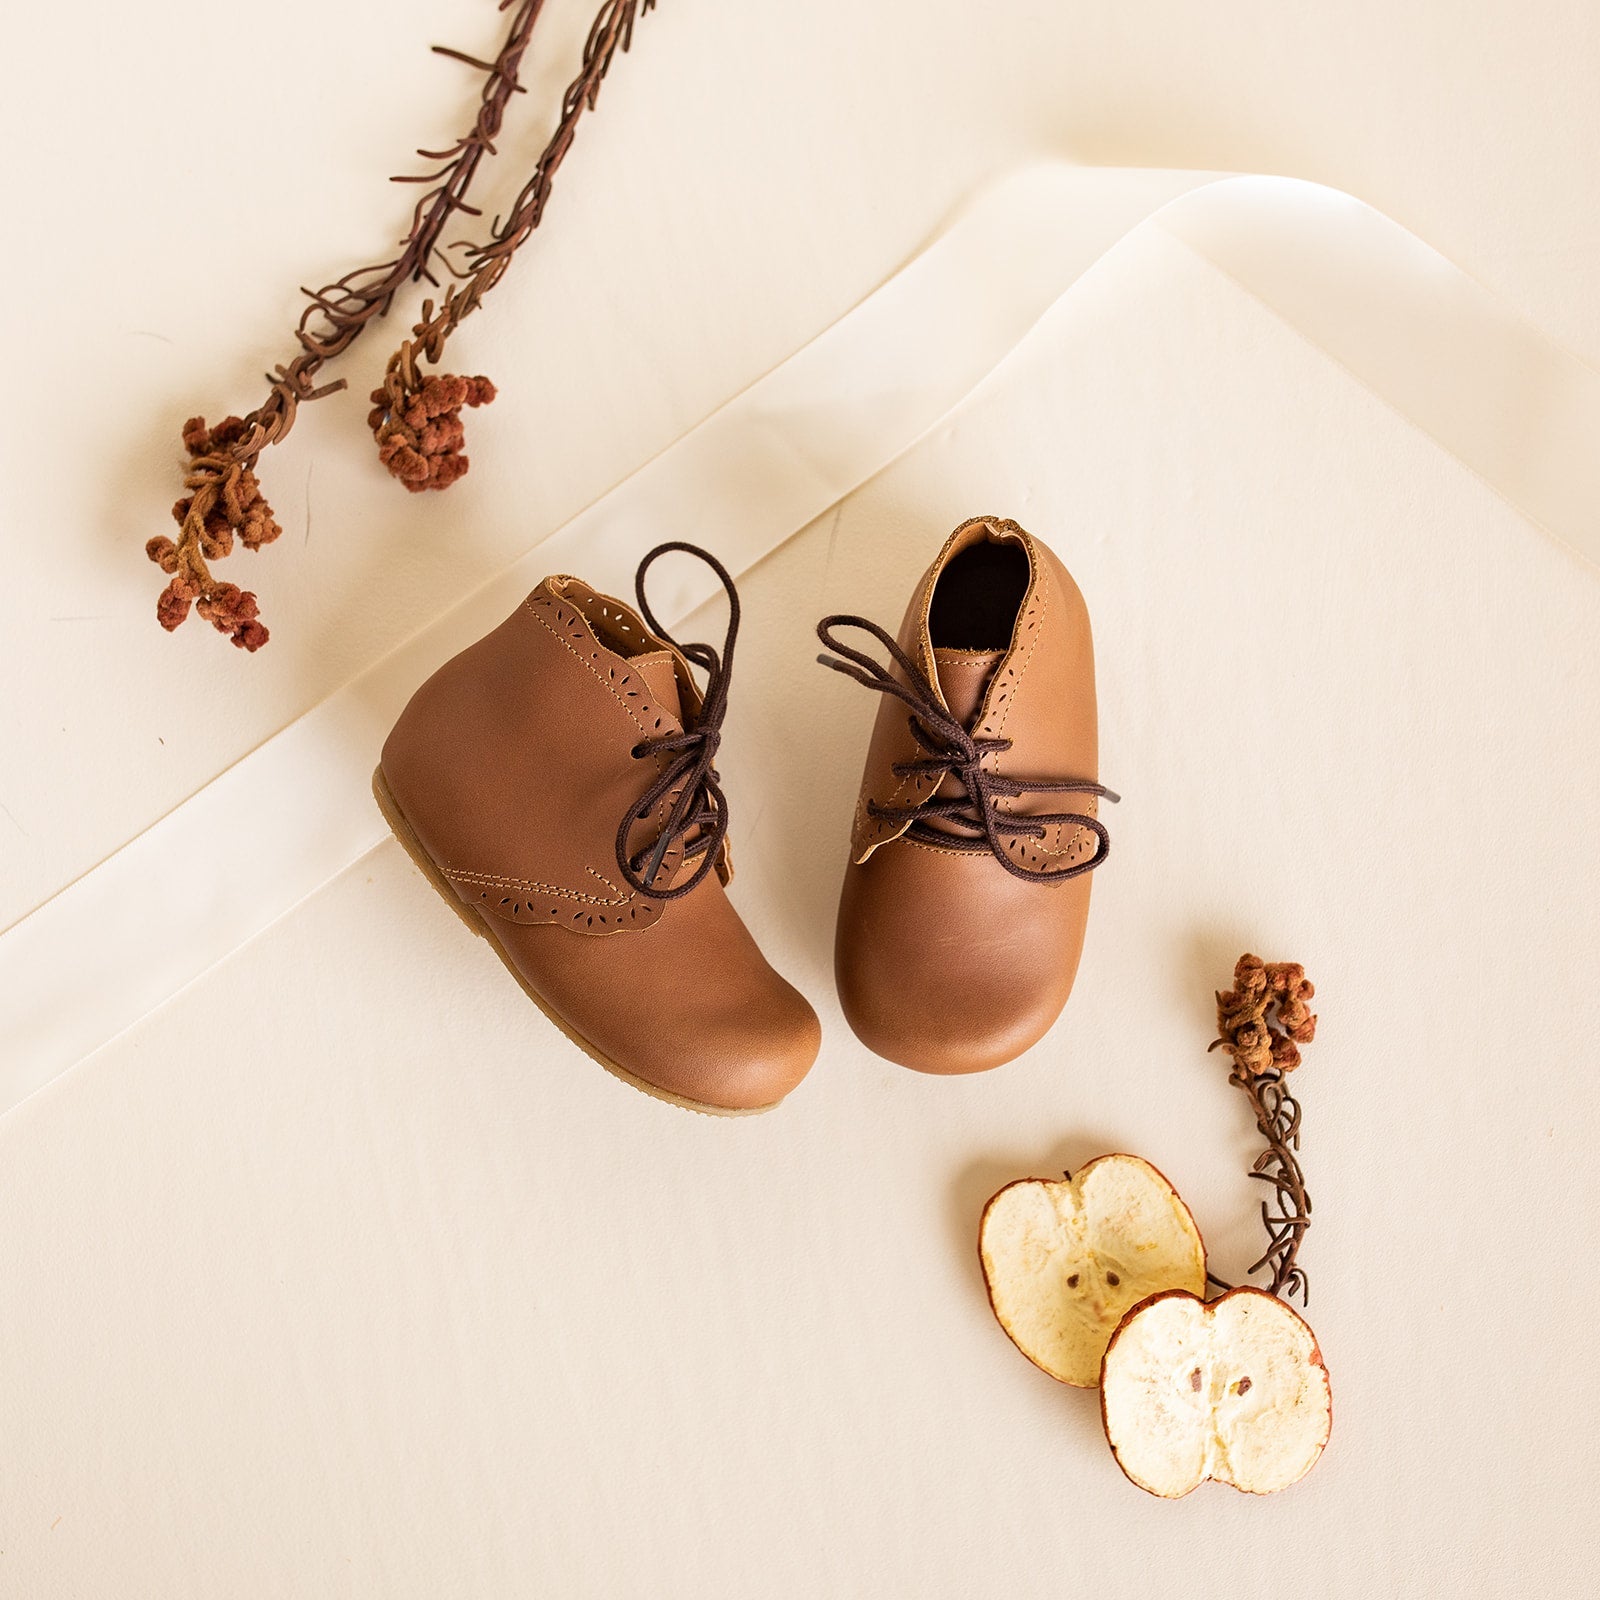 Adelisa &amp; Co handmade leather Primavera boots in a medium brown tone. These leather children&#39;s boots feature beautiful scallop edging and subtle floral details.